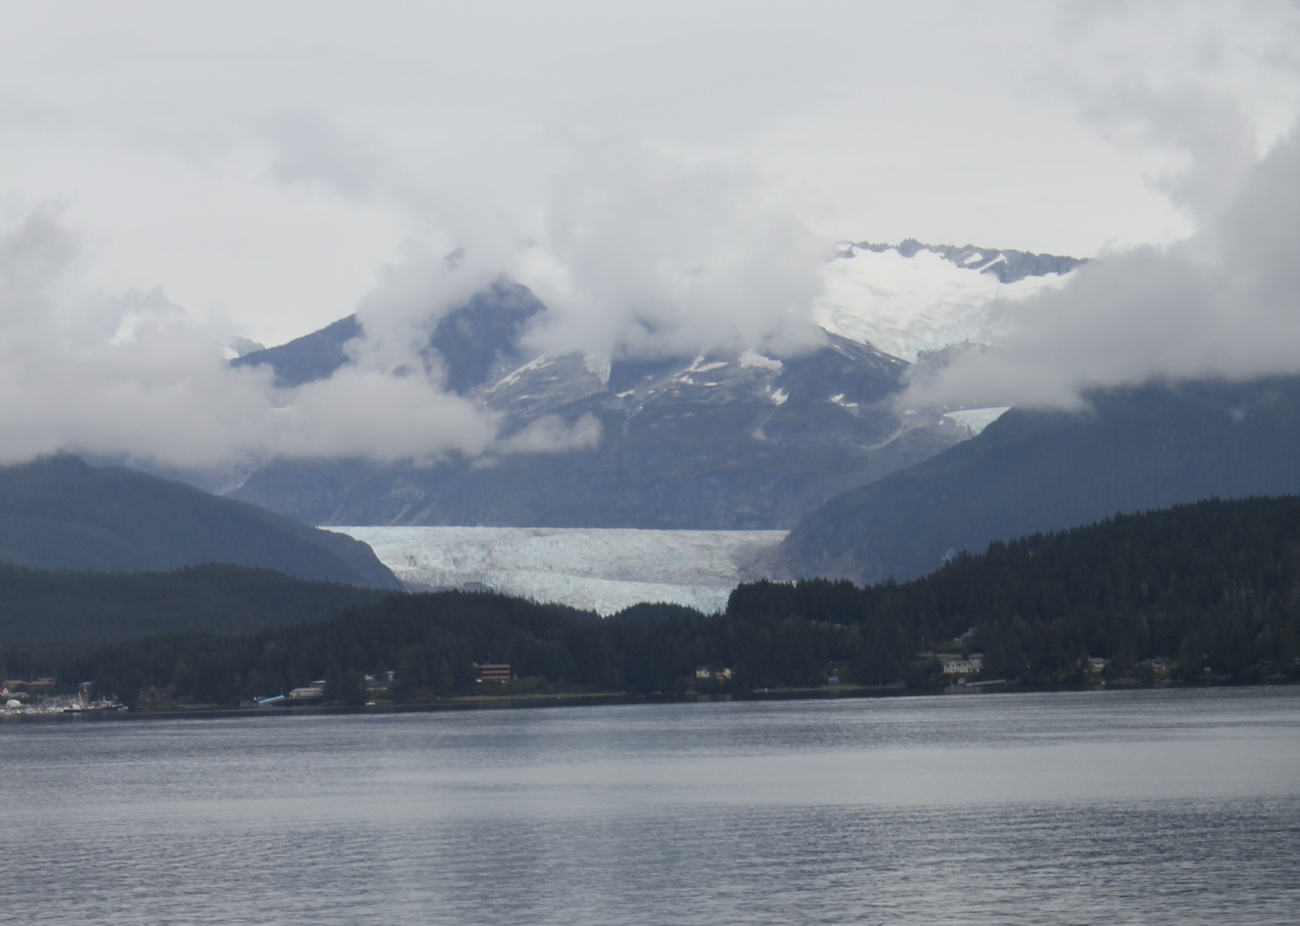 Approaching Juneau from the north